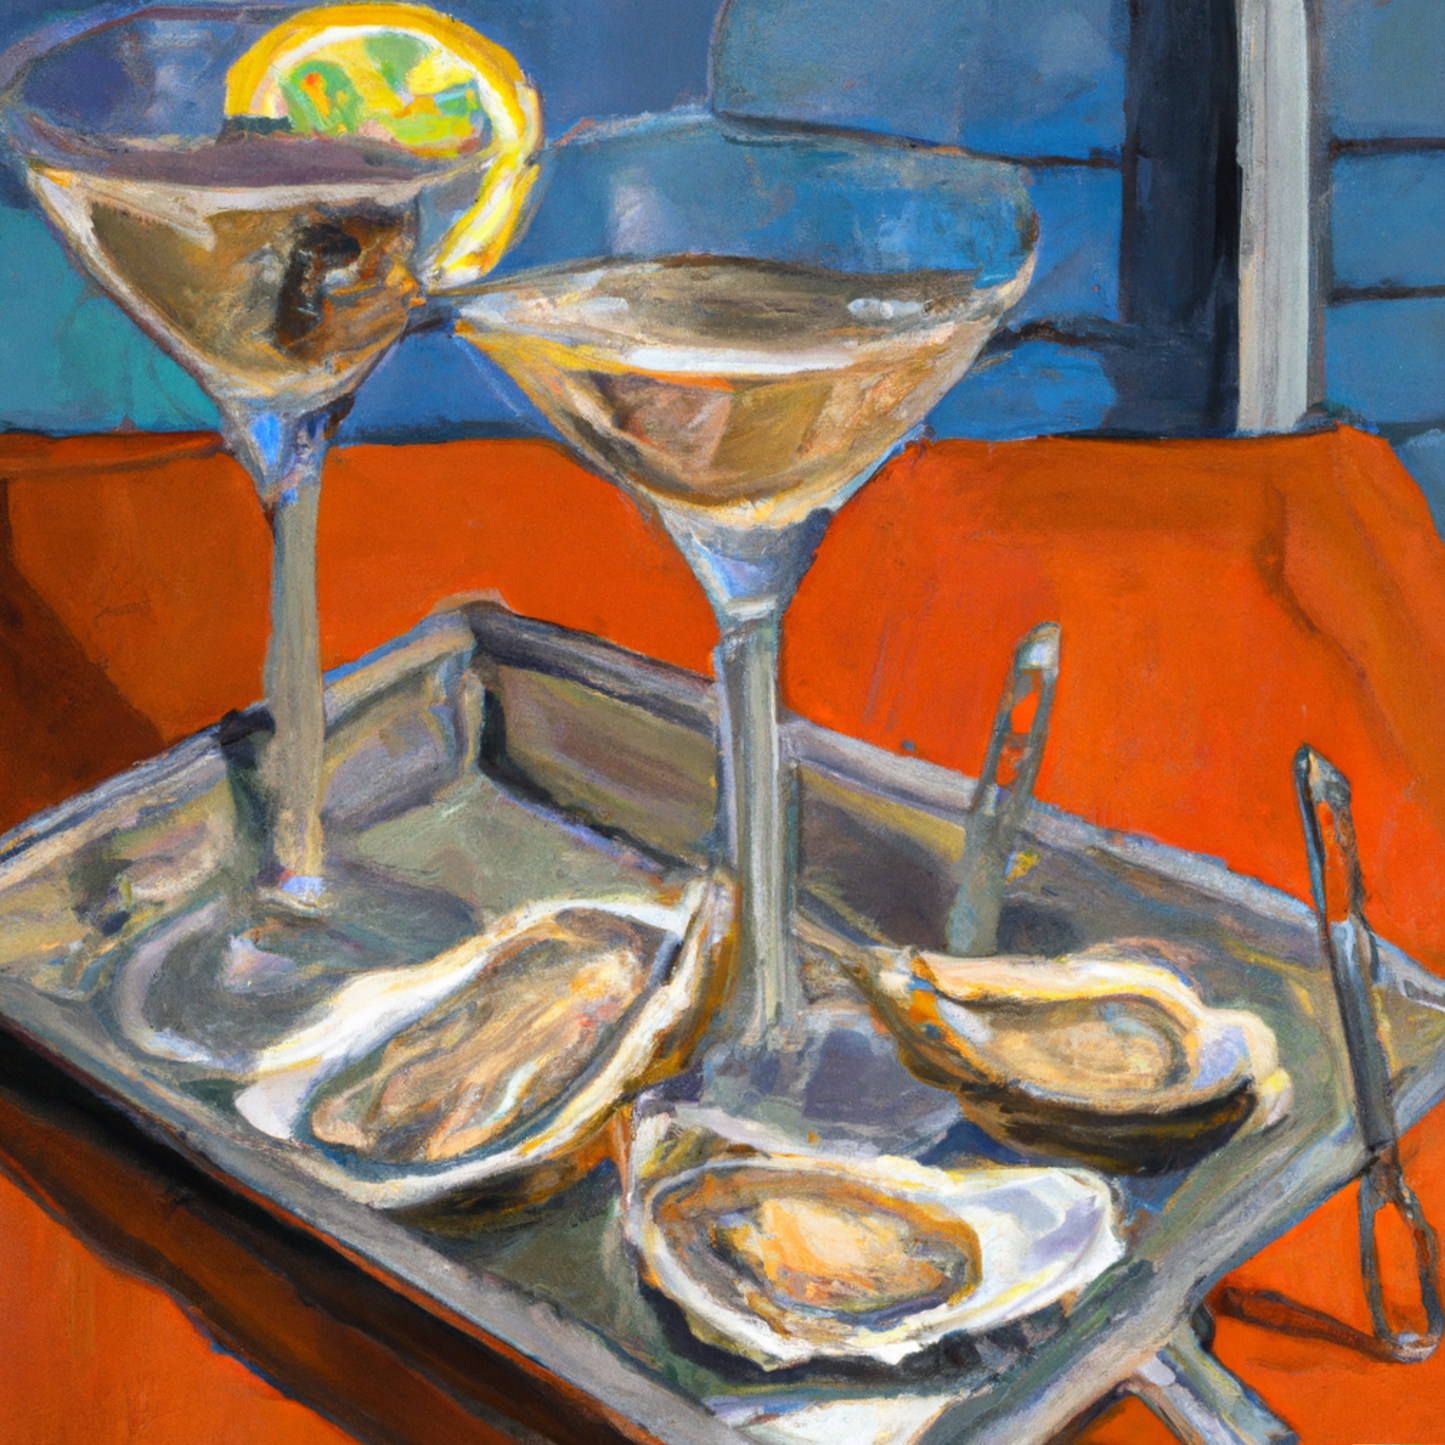 Martinis & Oysters